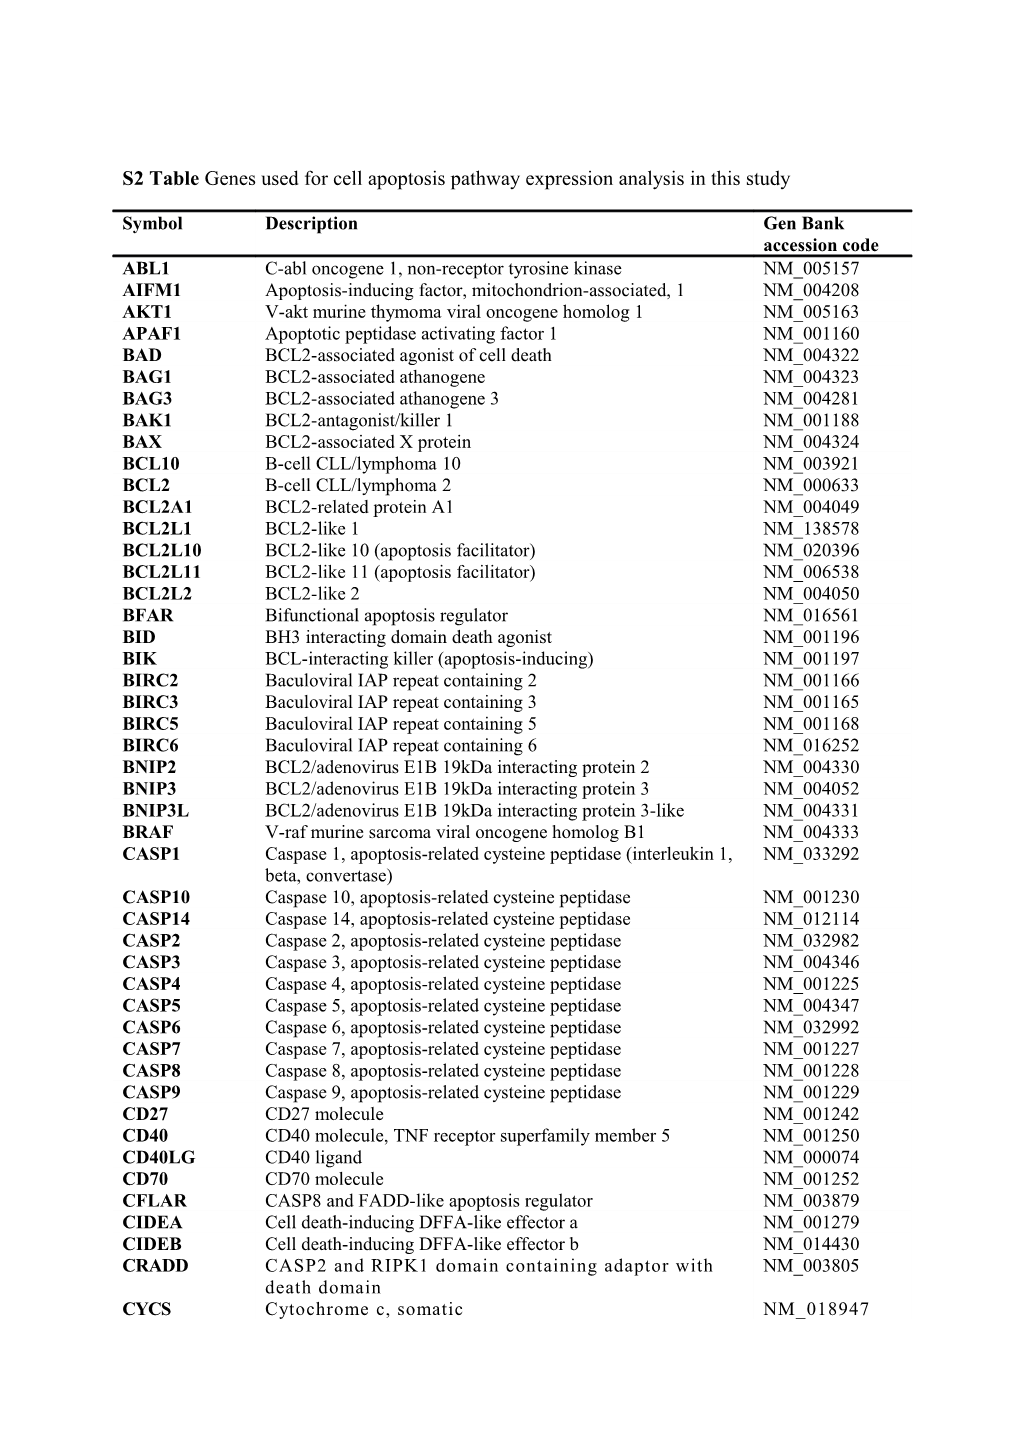 S2 Table Genes Used for Cell Apoptosis Pathway Expression Analysis in This Study